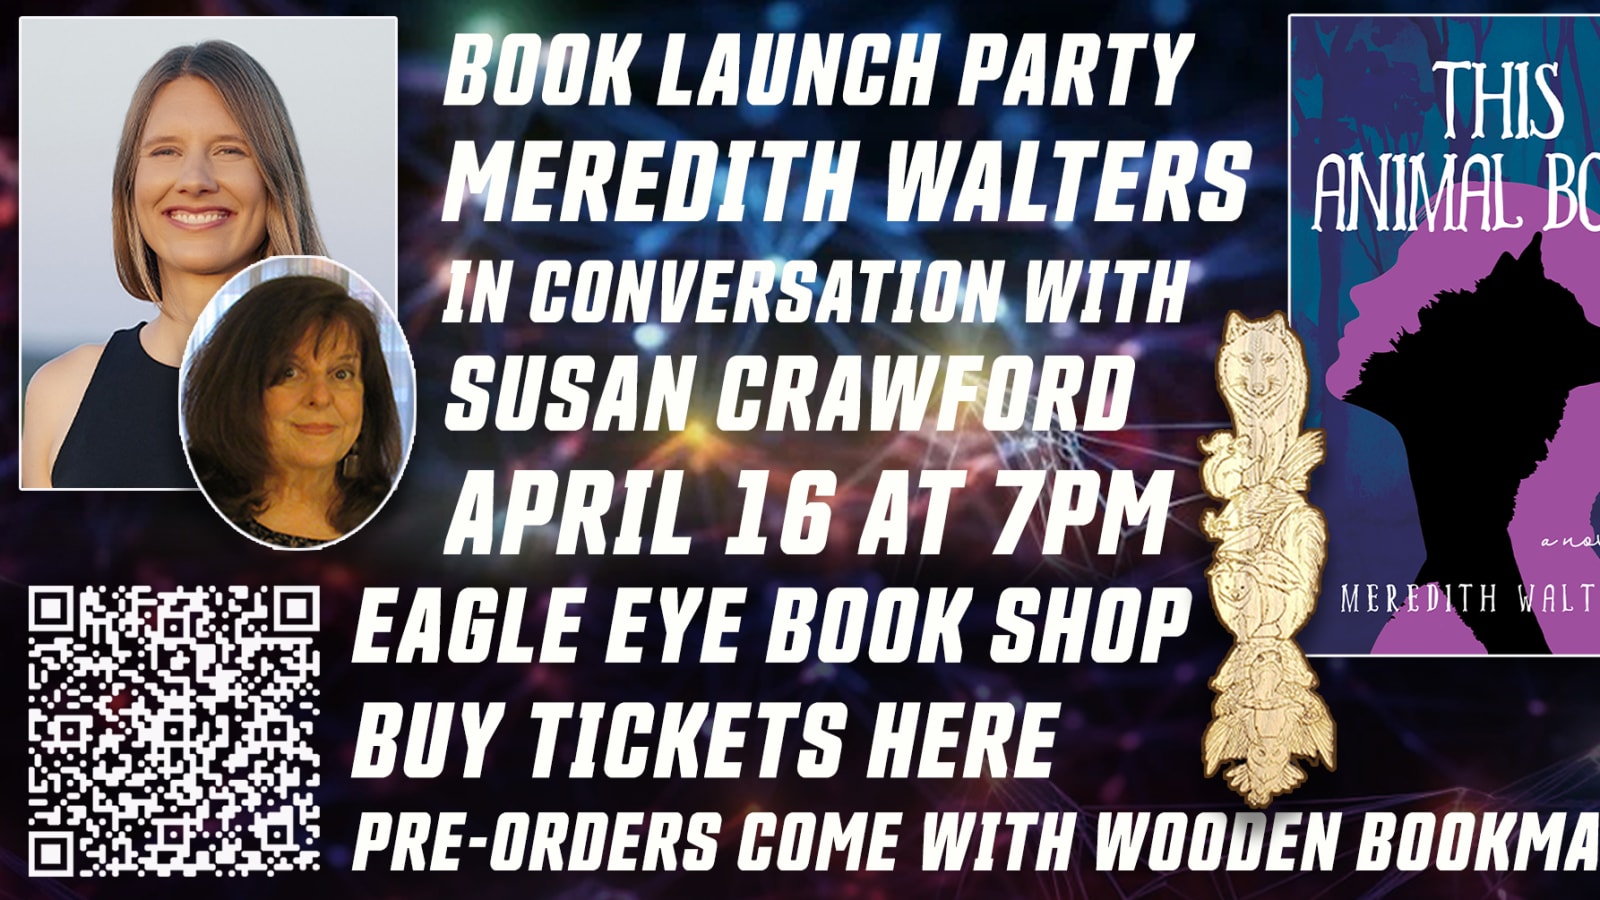 Meredith Walters Book Launch Party